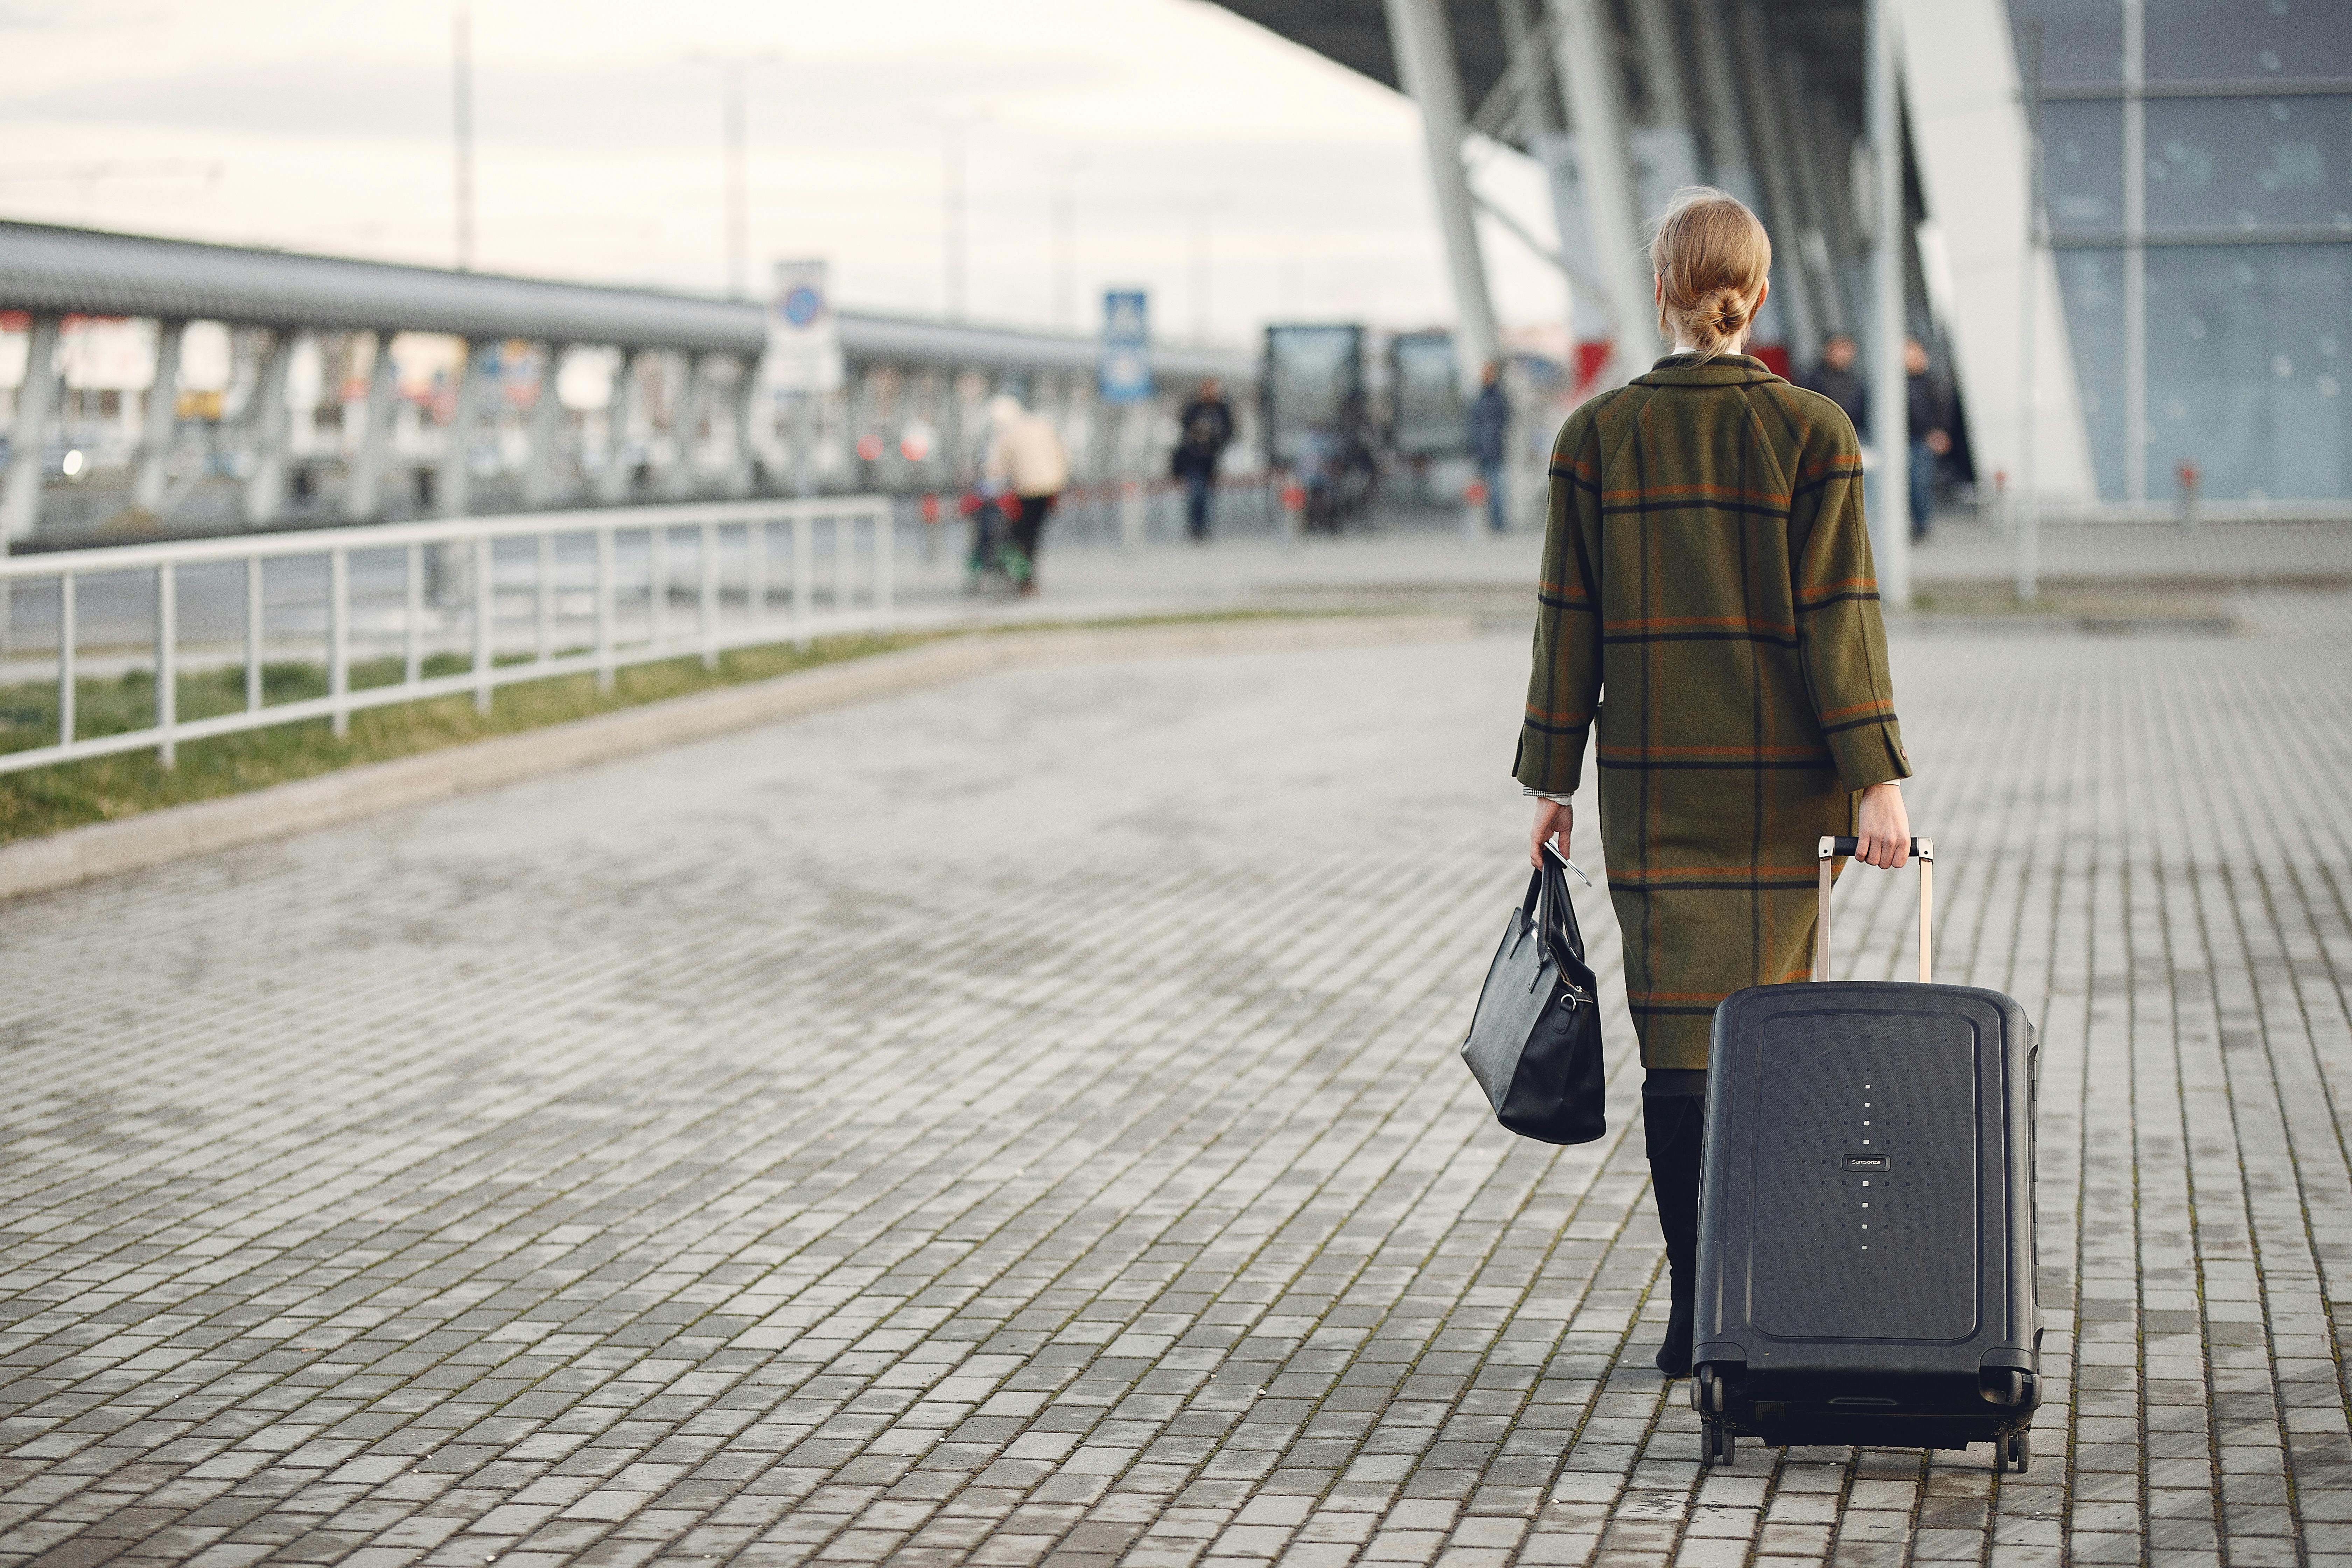 A woman walking away with her luggage | Source: Pexels